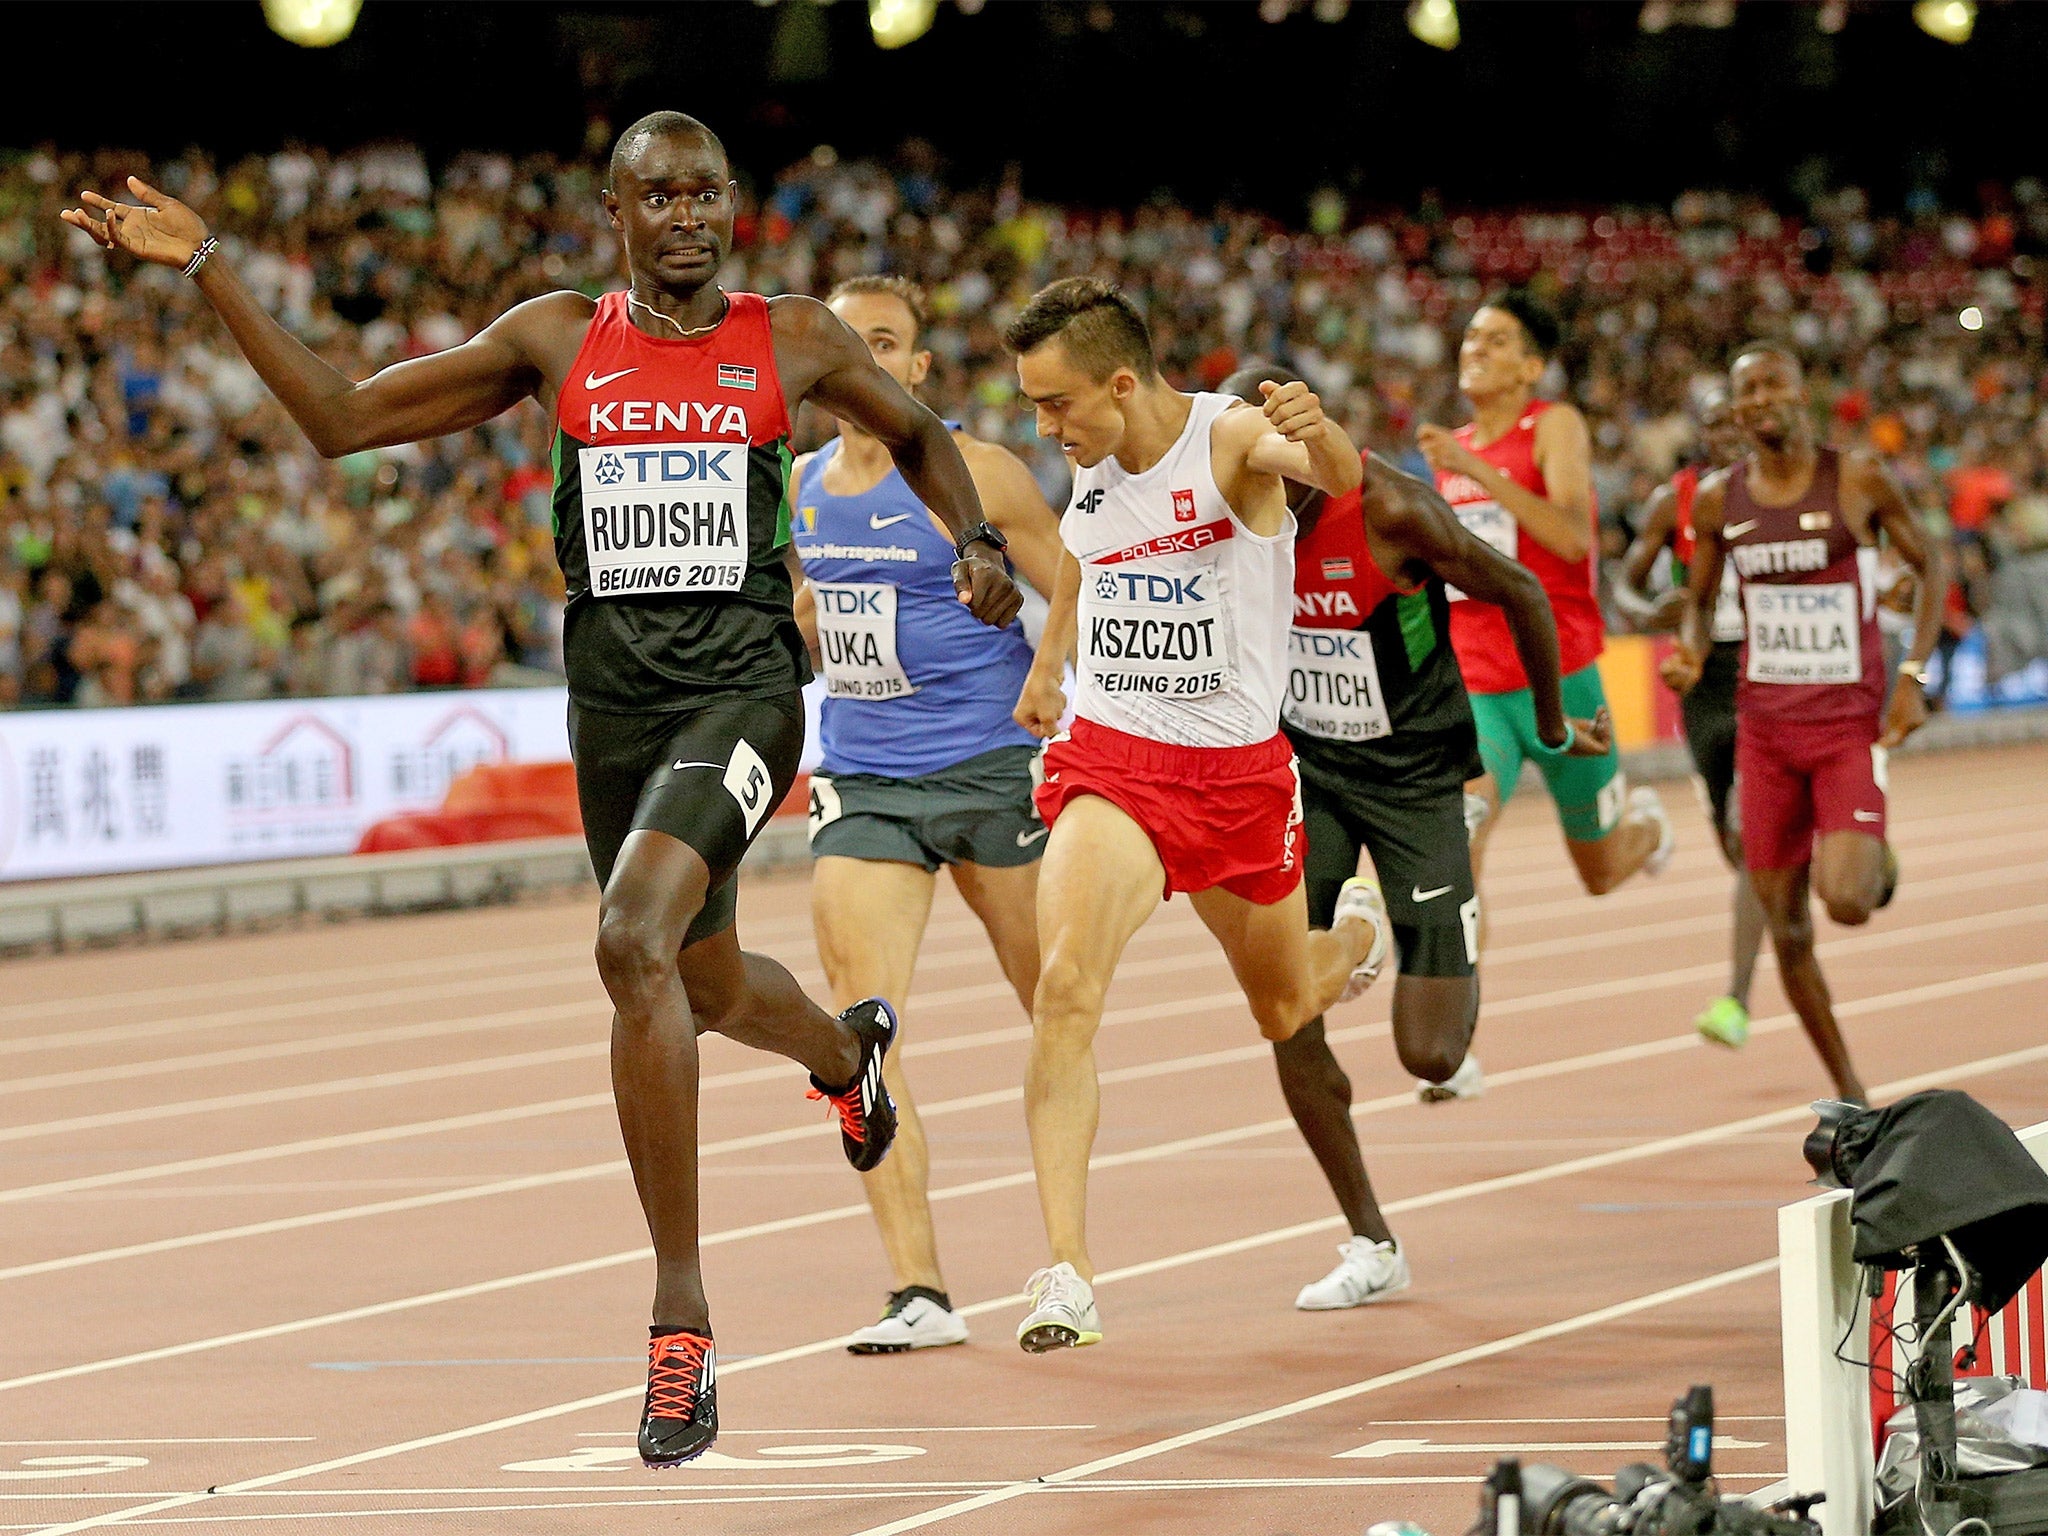 Kenya’s David Rudisha holds off a late charge from two of his rivals to win his second world title